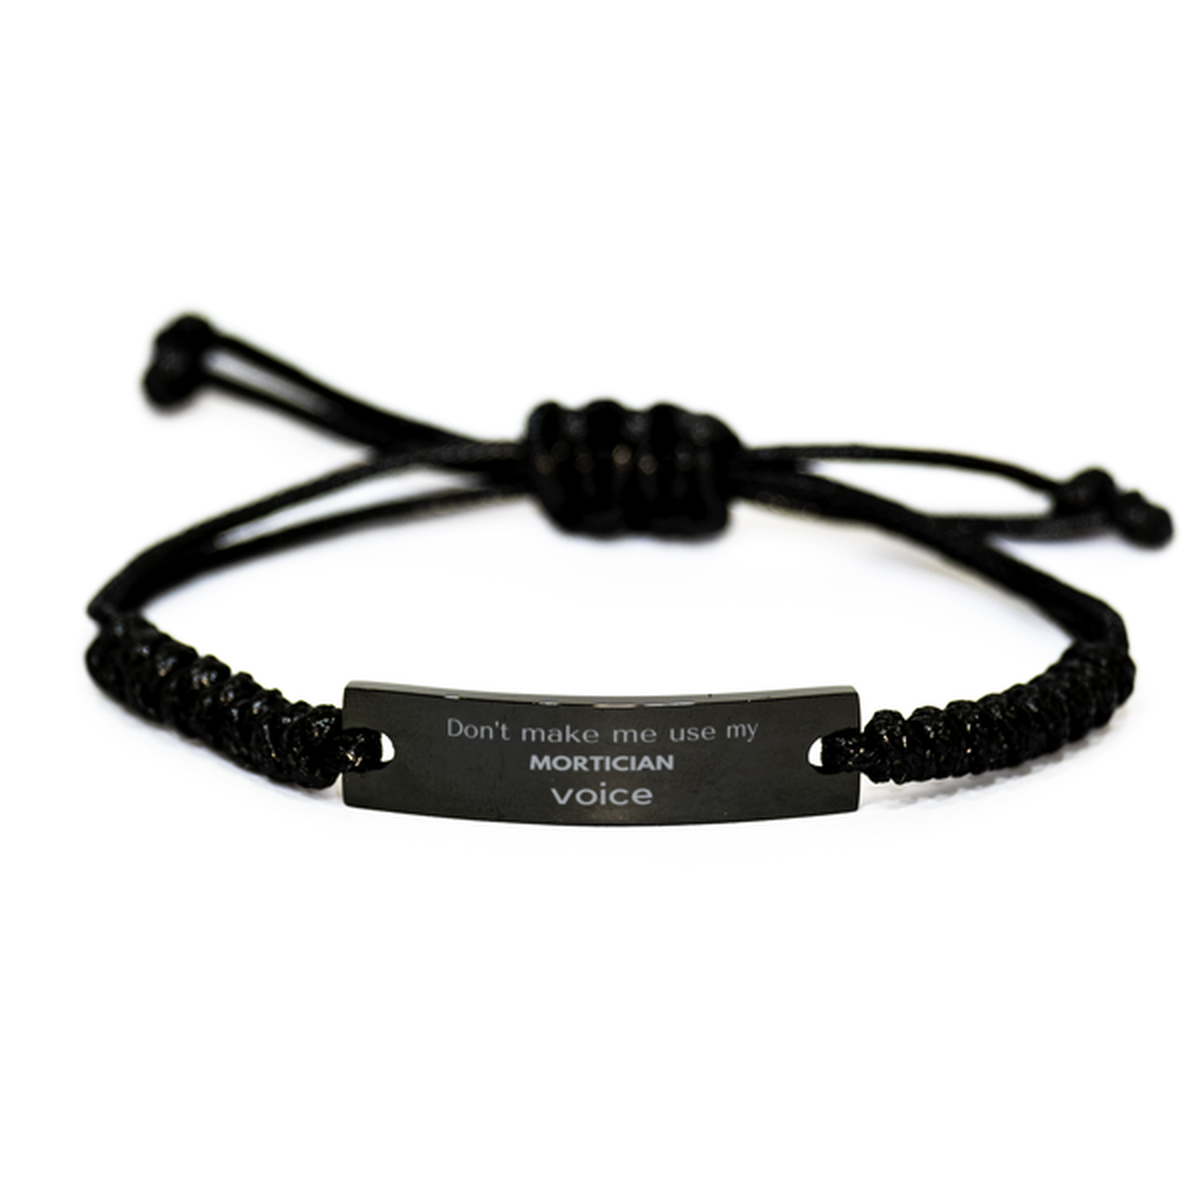 Don't make me use my Mortician voice, Sarcasm Mortician Gifts, Christmas Mortician Black Rope Bracelet Birthday Unique Gifts For Mortician Coworkers, Men, Women, Colleague, Friends